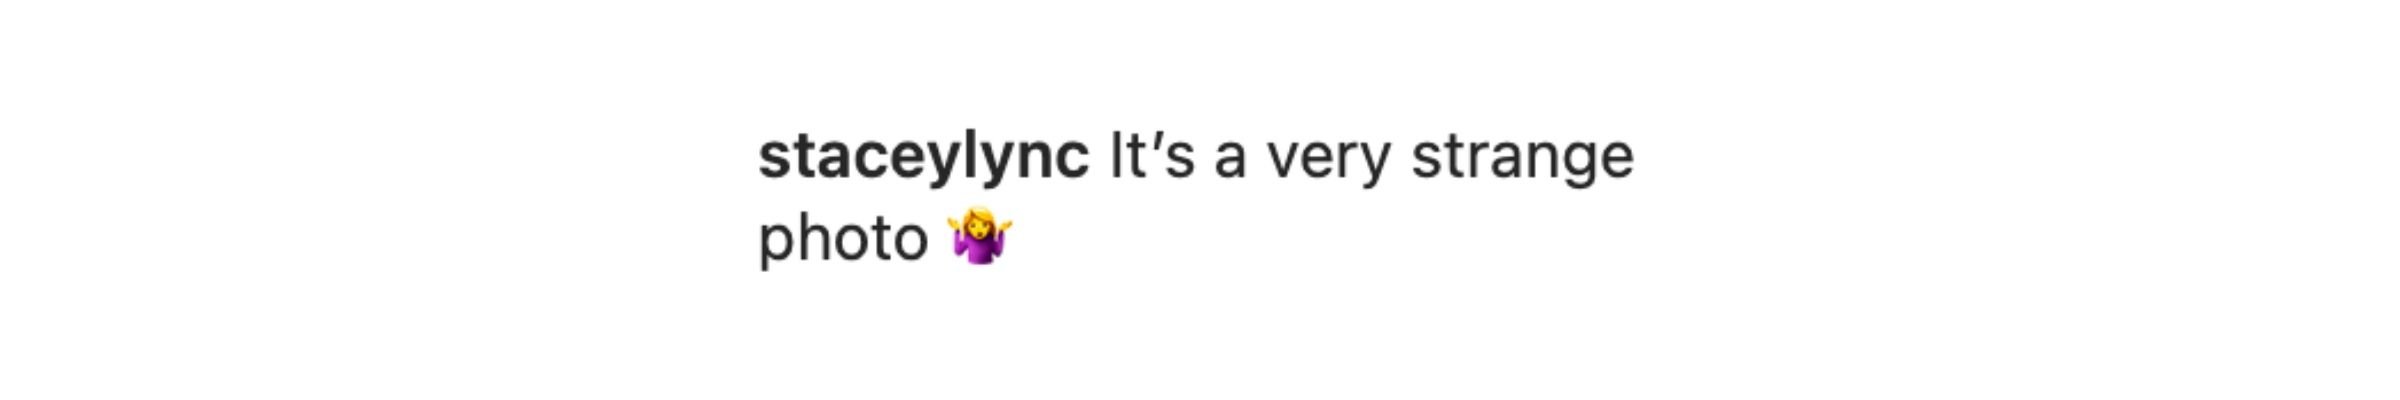 A fan's comment on Candace Cameron Bure's Instagram post on June 2, 2021. | Source: Instagram/candacecbure